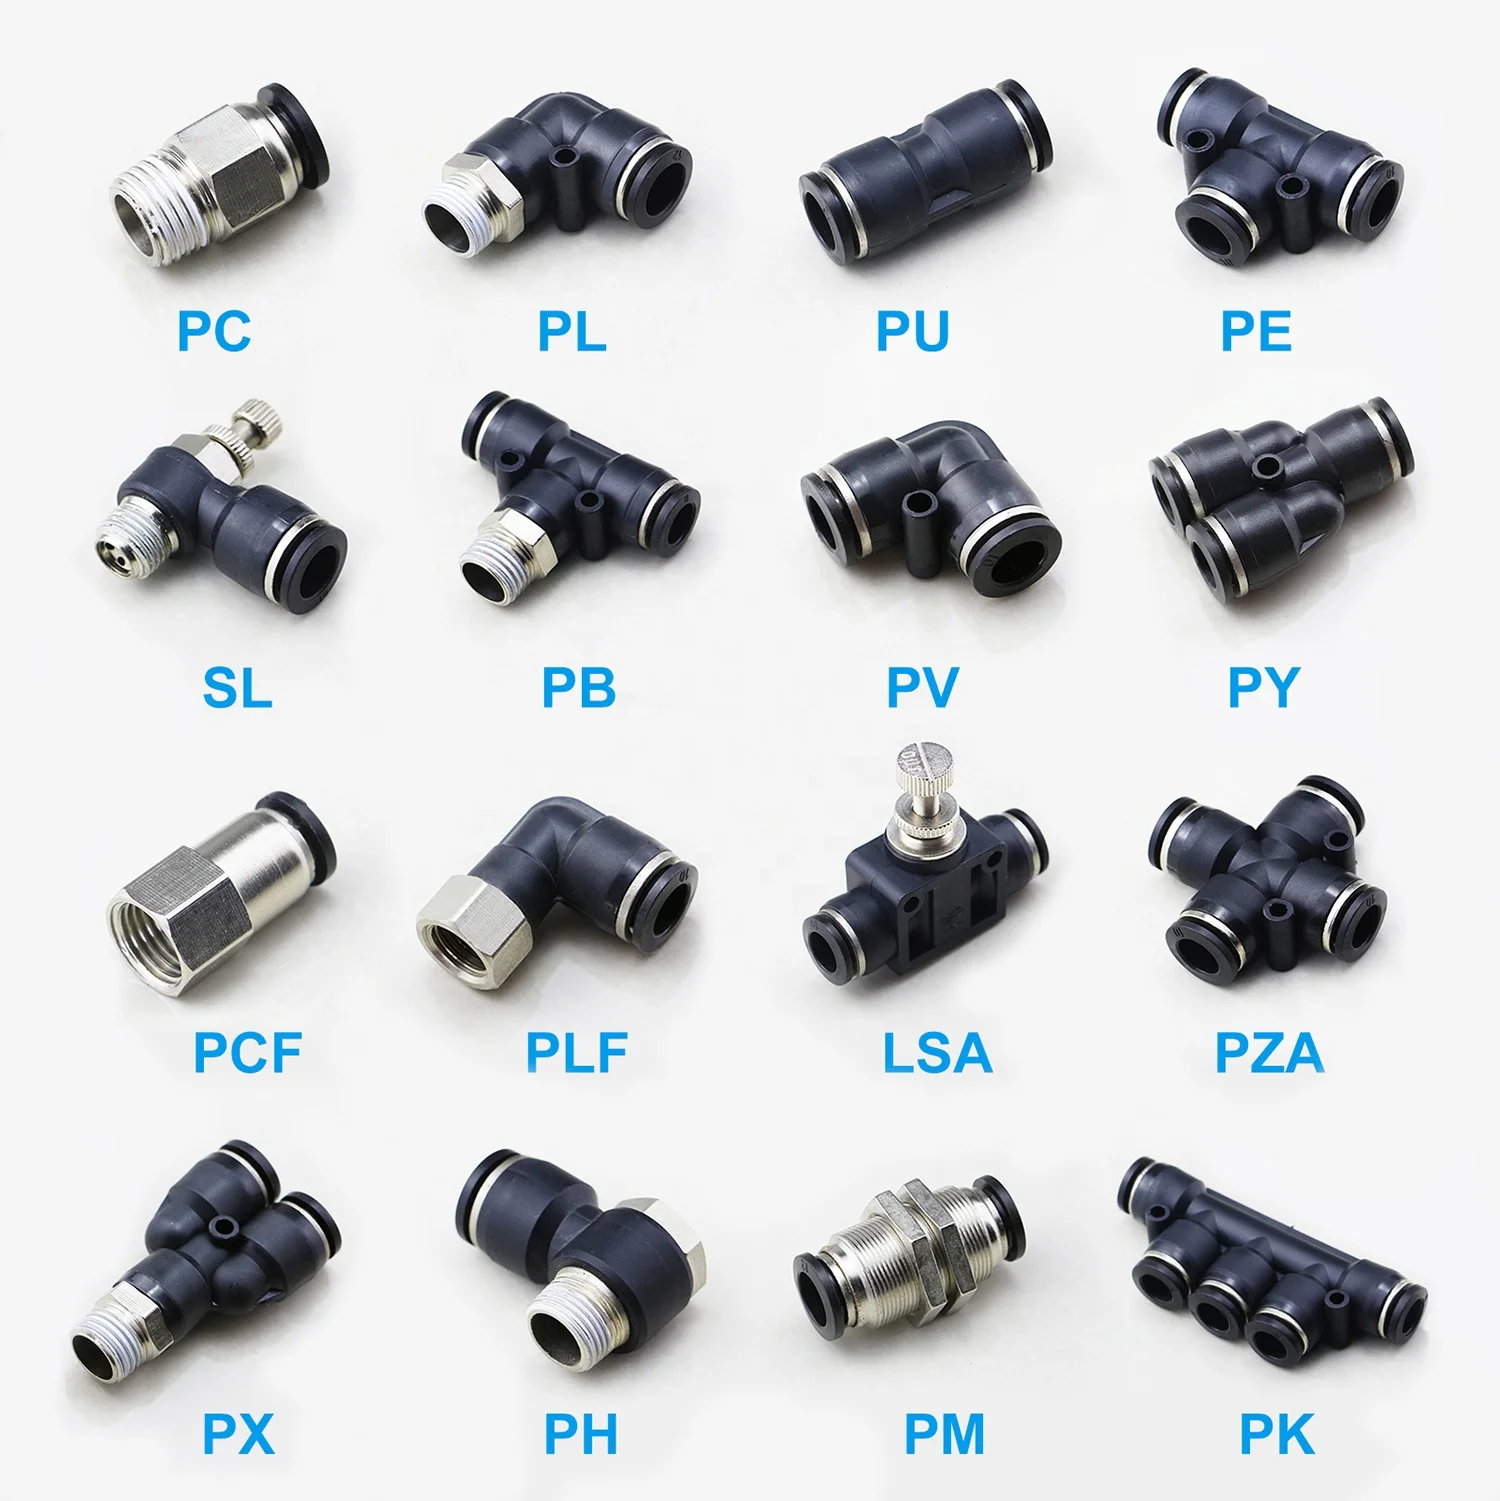 Pneumatic Y Sharp Connector Tube OD 3/8" X NPT 1/4" Air Push In Fitting 5 Pieces